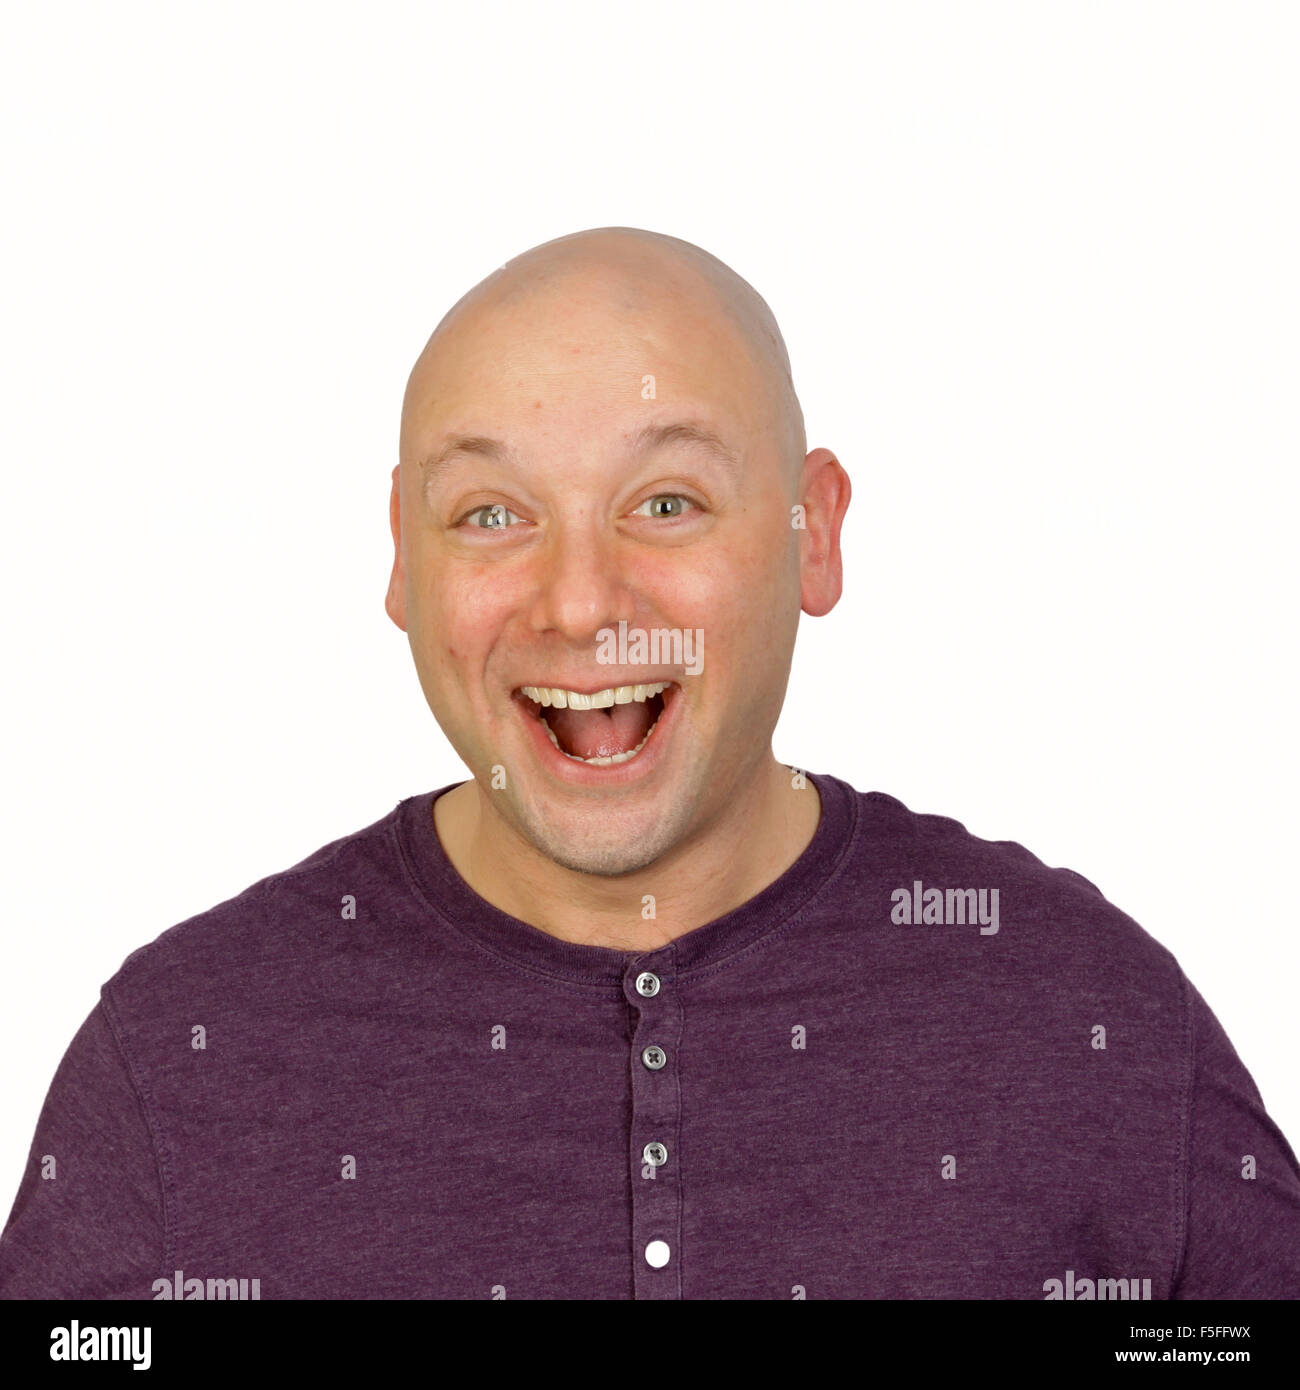 Guffaw facial expression on man's face shot in studio white background Stock Photo